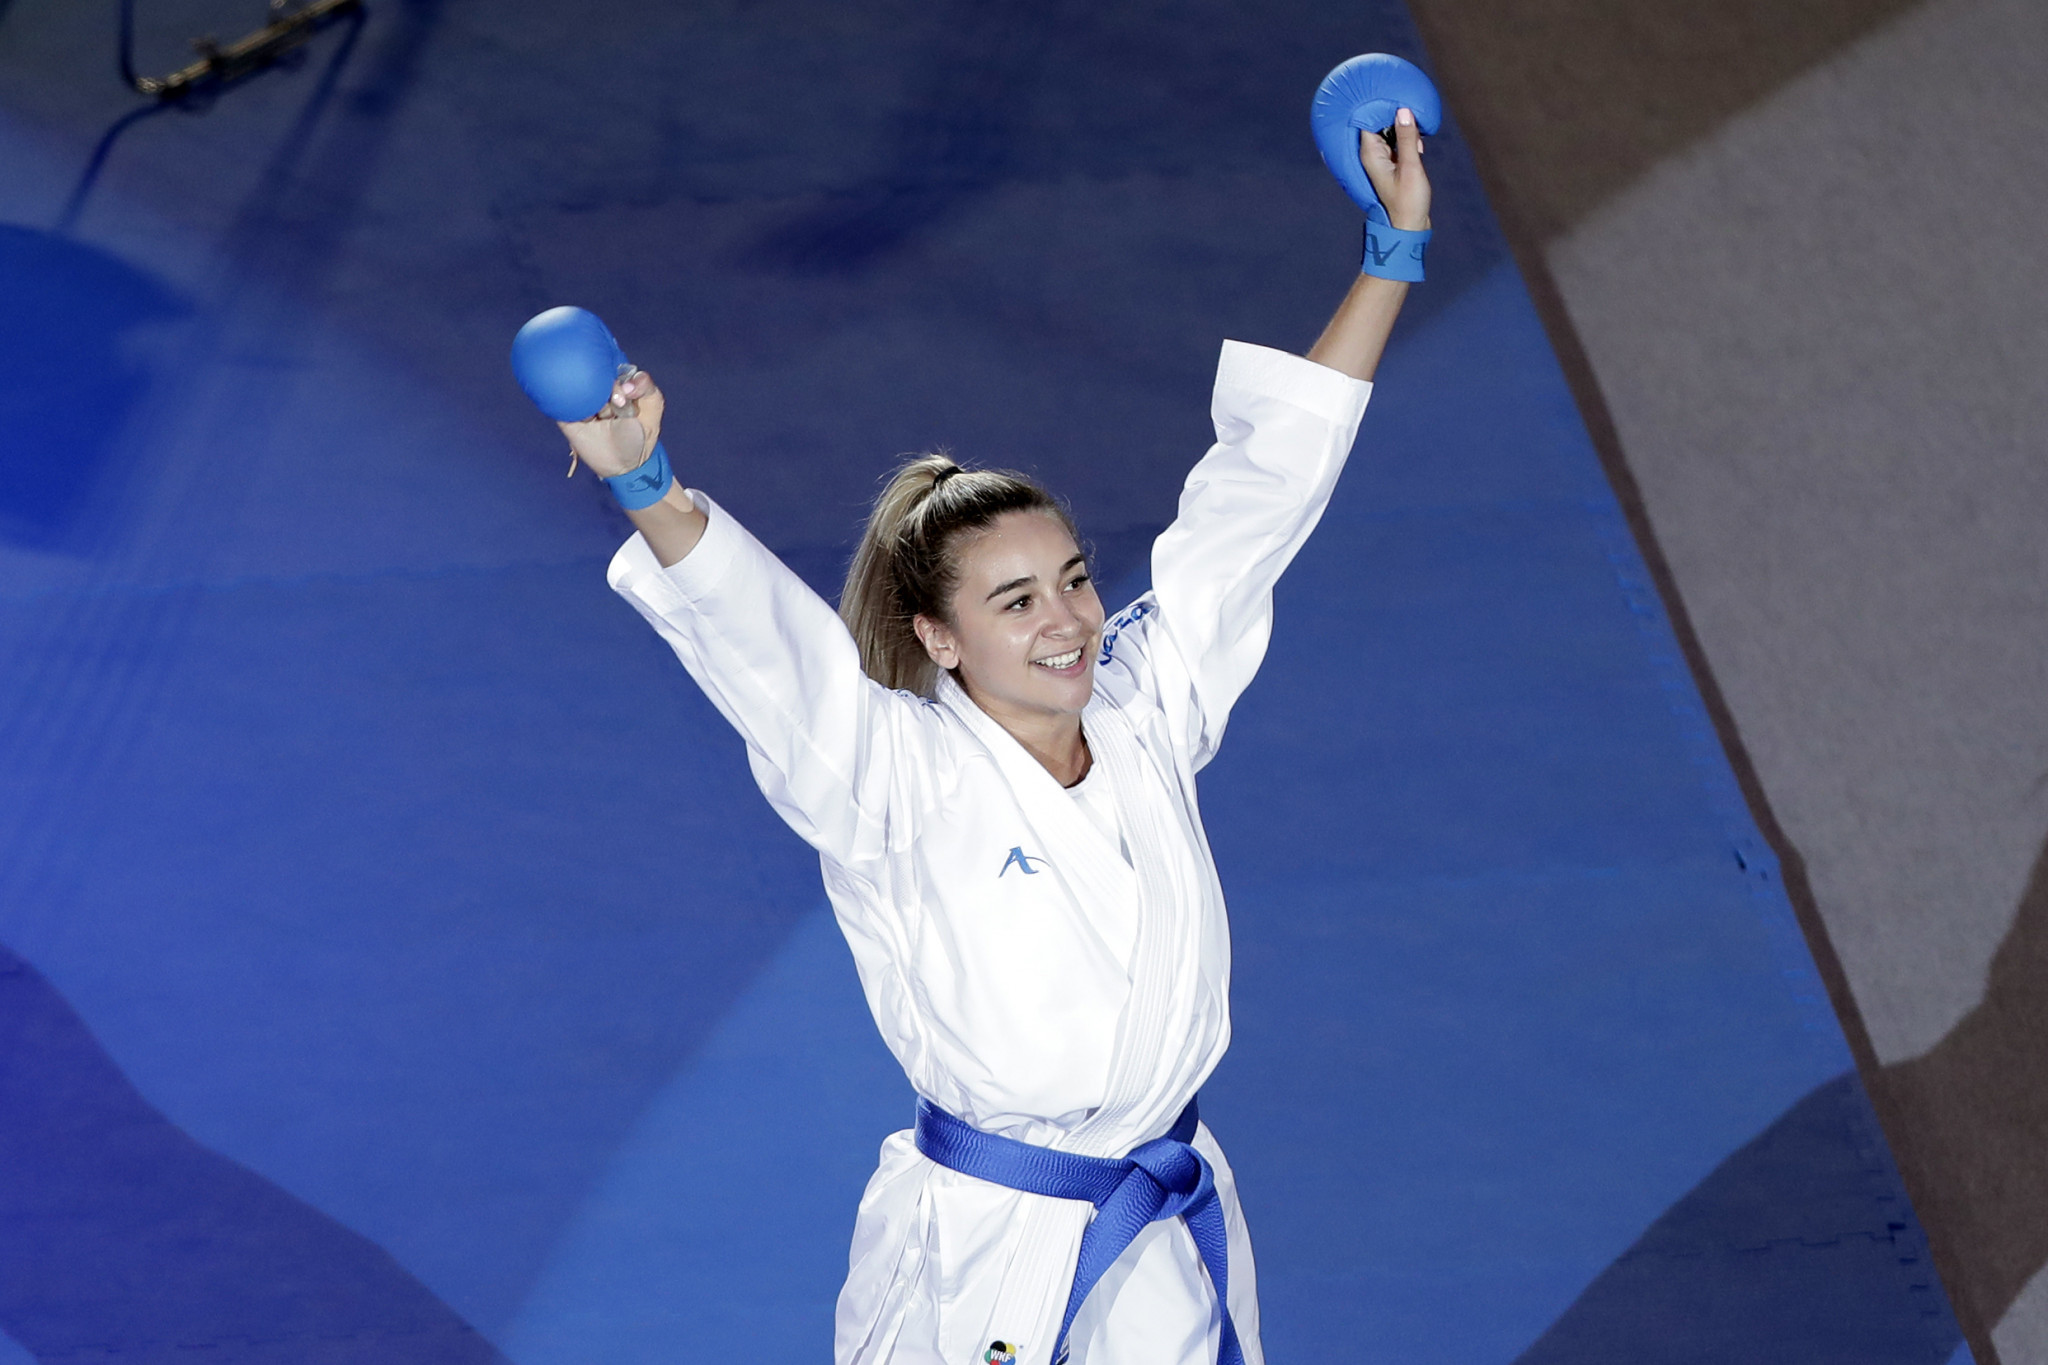 Anzhelika Terliuga is aiming for a fifth successive final in as many events at the Karate 1-Premier League event in Baku ©Getty Images